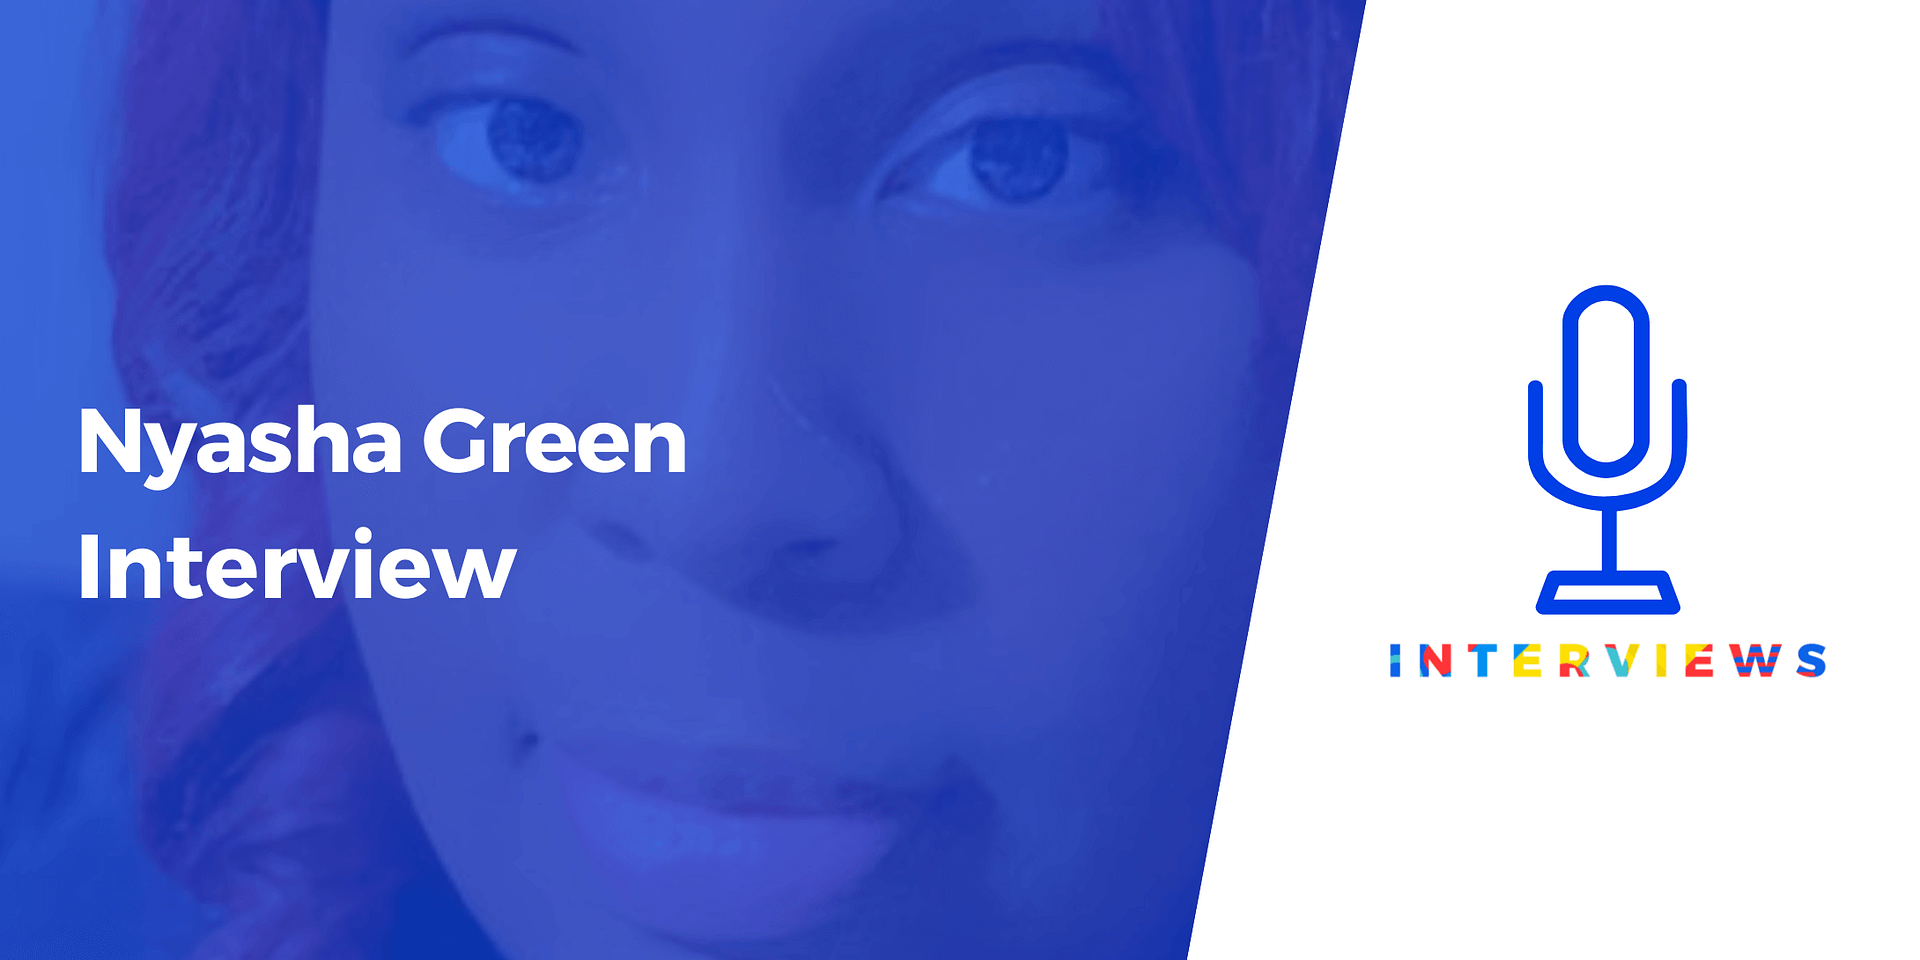 Nyasha Green Interview - "A Good Story Is Something That Makes People Think"